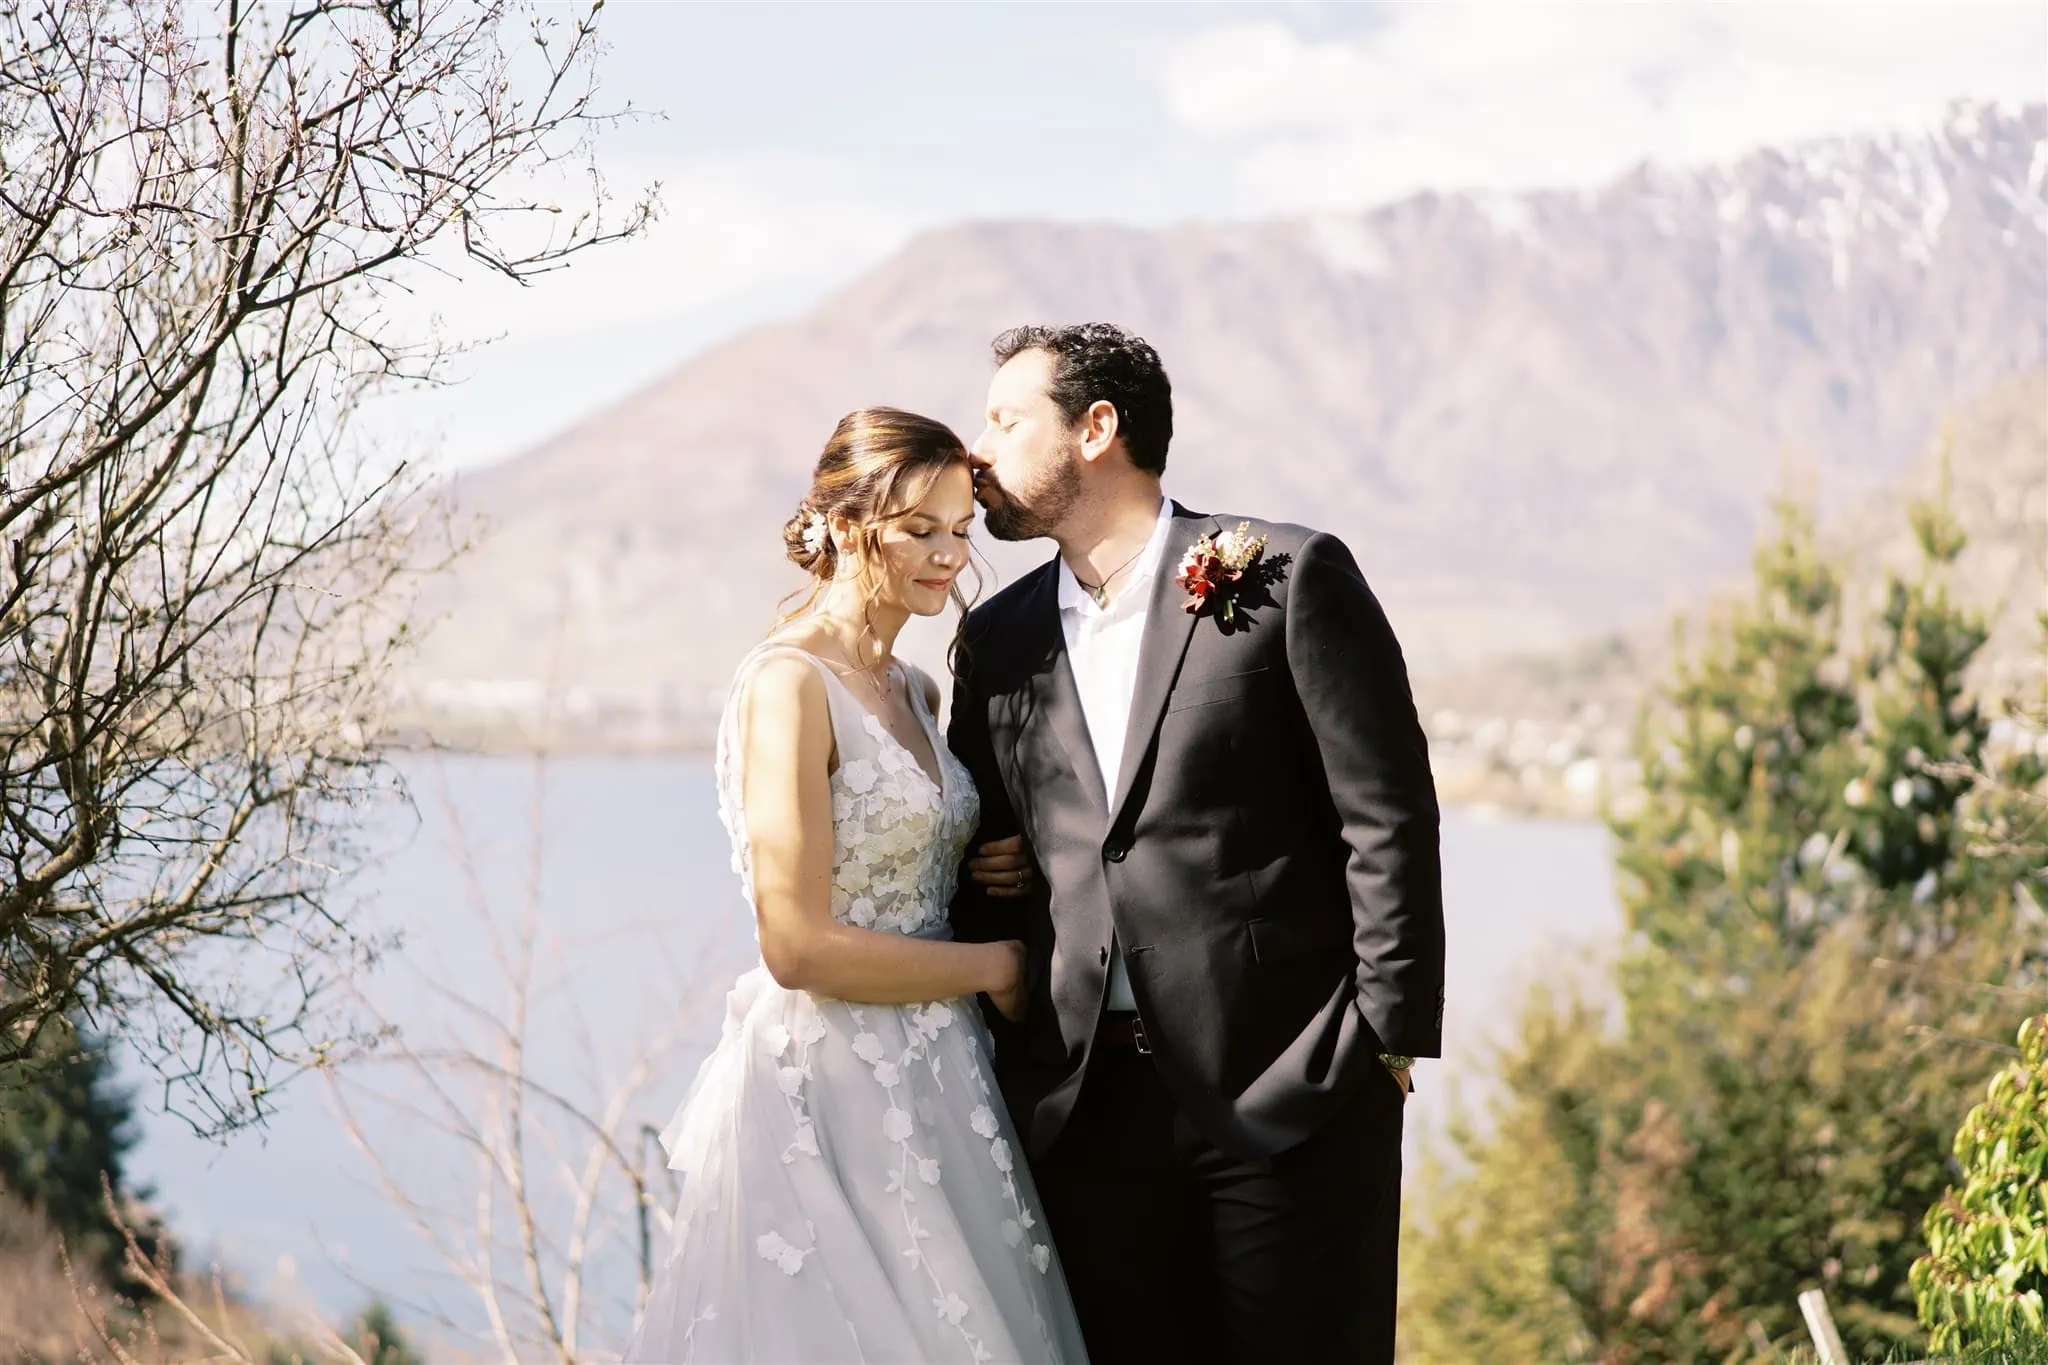 Queenstown New Zealand Elopement Wedding Photographer - Queenstown bride and groom standing in front of a lake with mountains in the background.